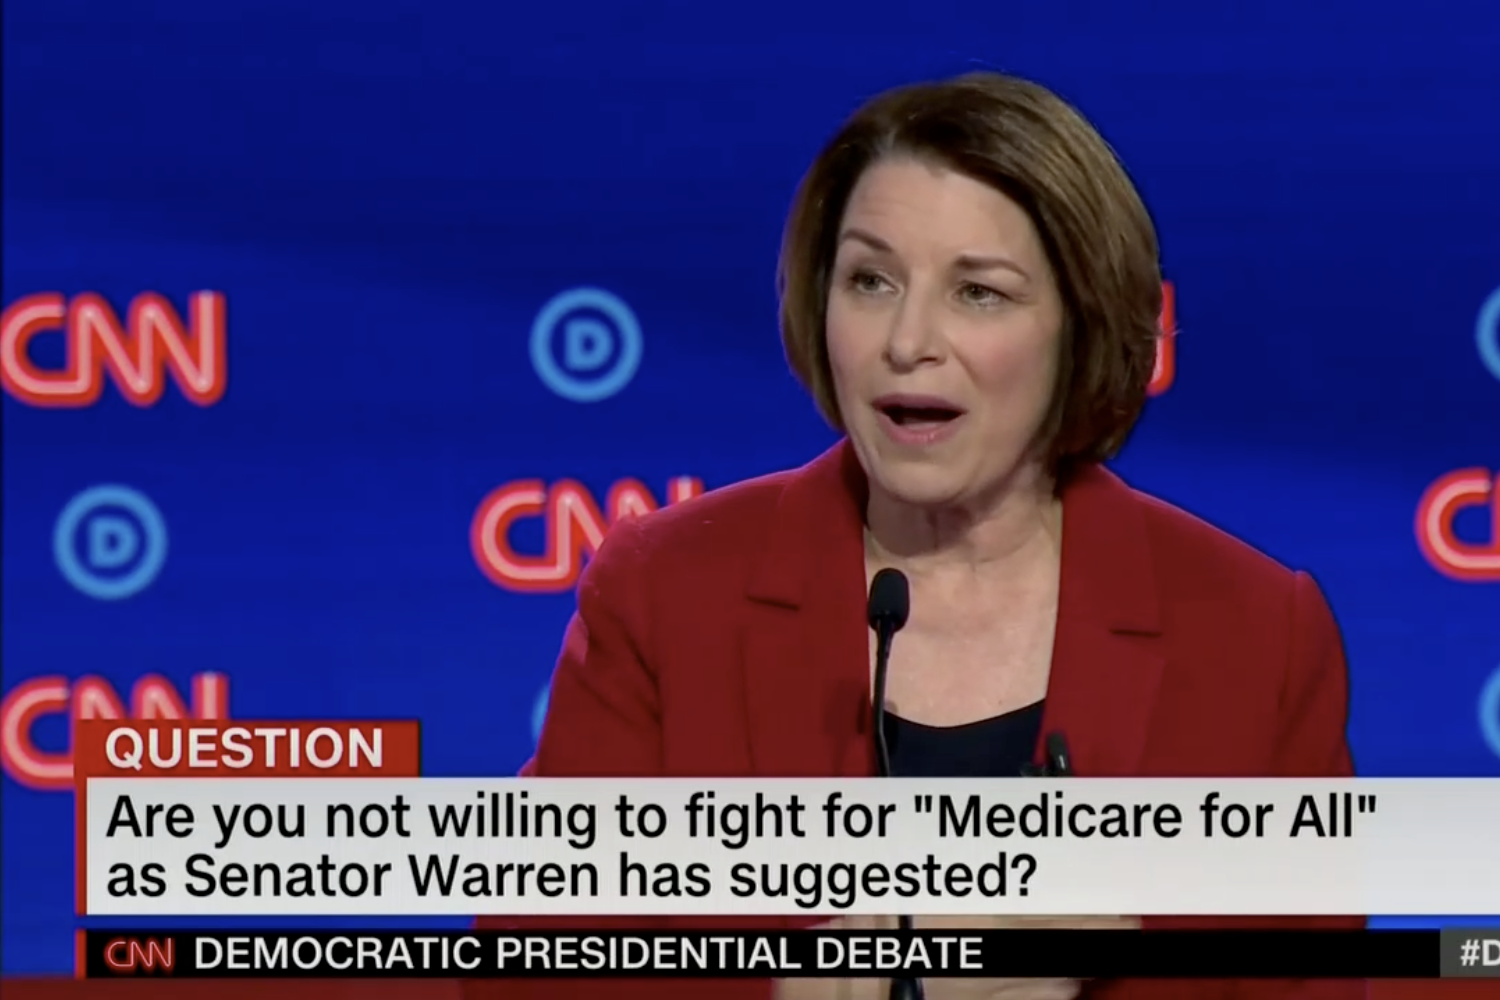 In this screengrab from CNN, Amy Klobuchar debates. The banner reads: “Are you not willing to fight for 'Medicare for All' as Senator Warren has suggested?"